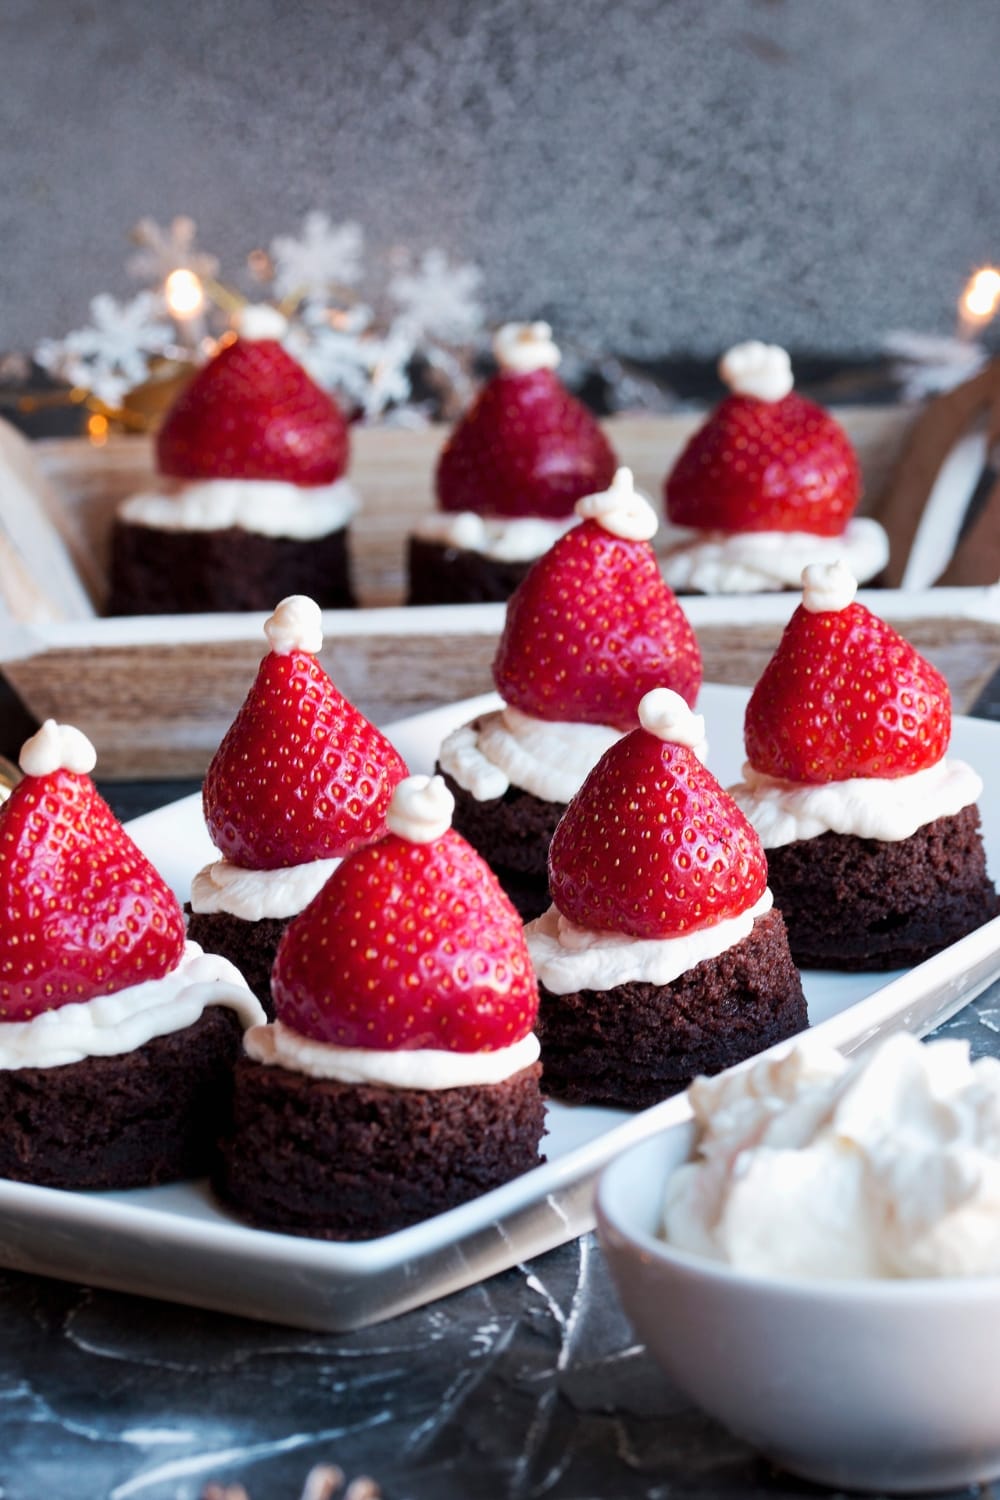 Strawberry Christmas hats made with chocolate brownies., ripe strawberries and whipped cream. 